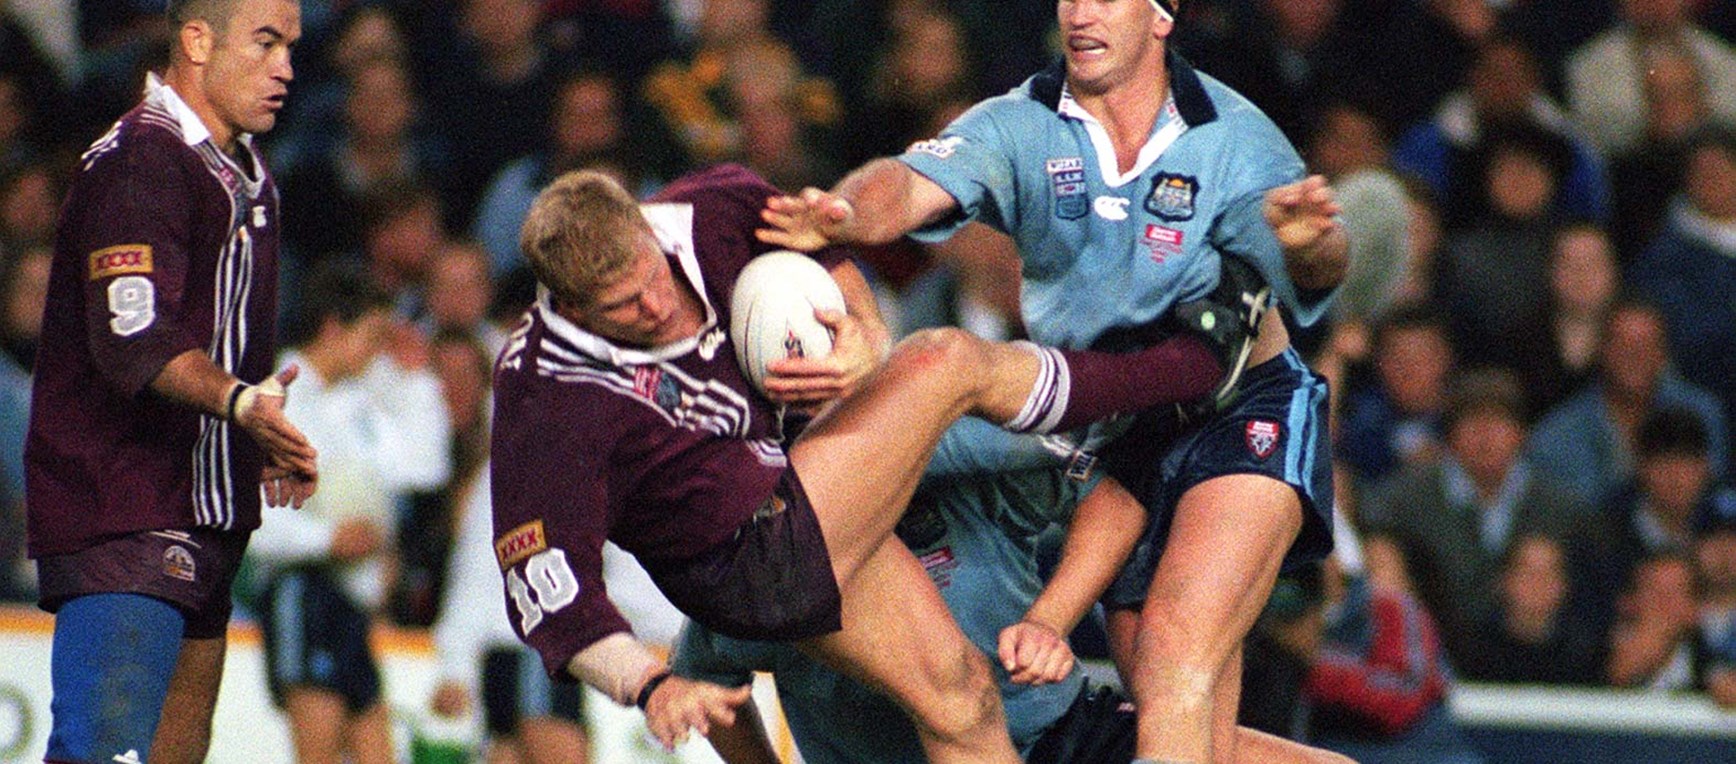 In pictures: 1998 State of Origin